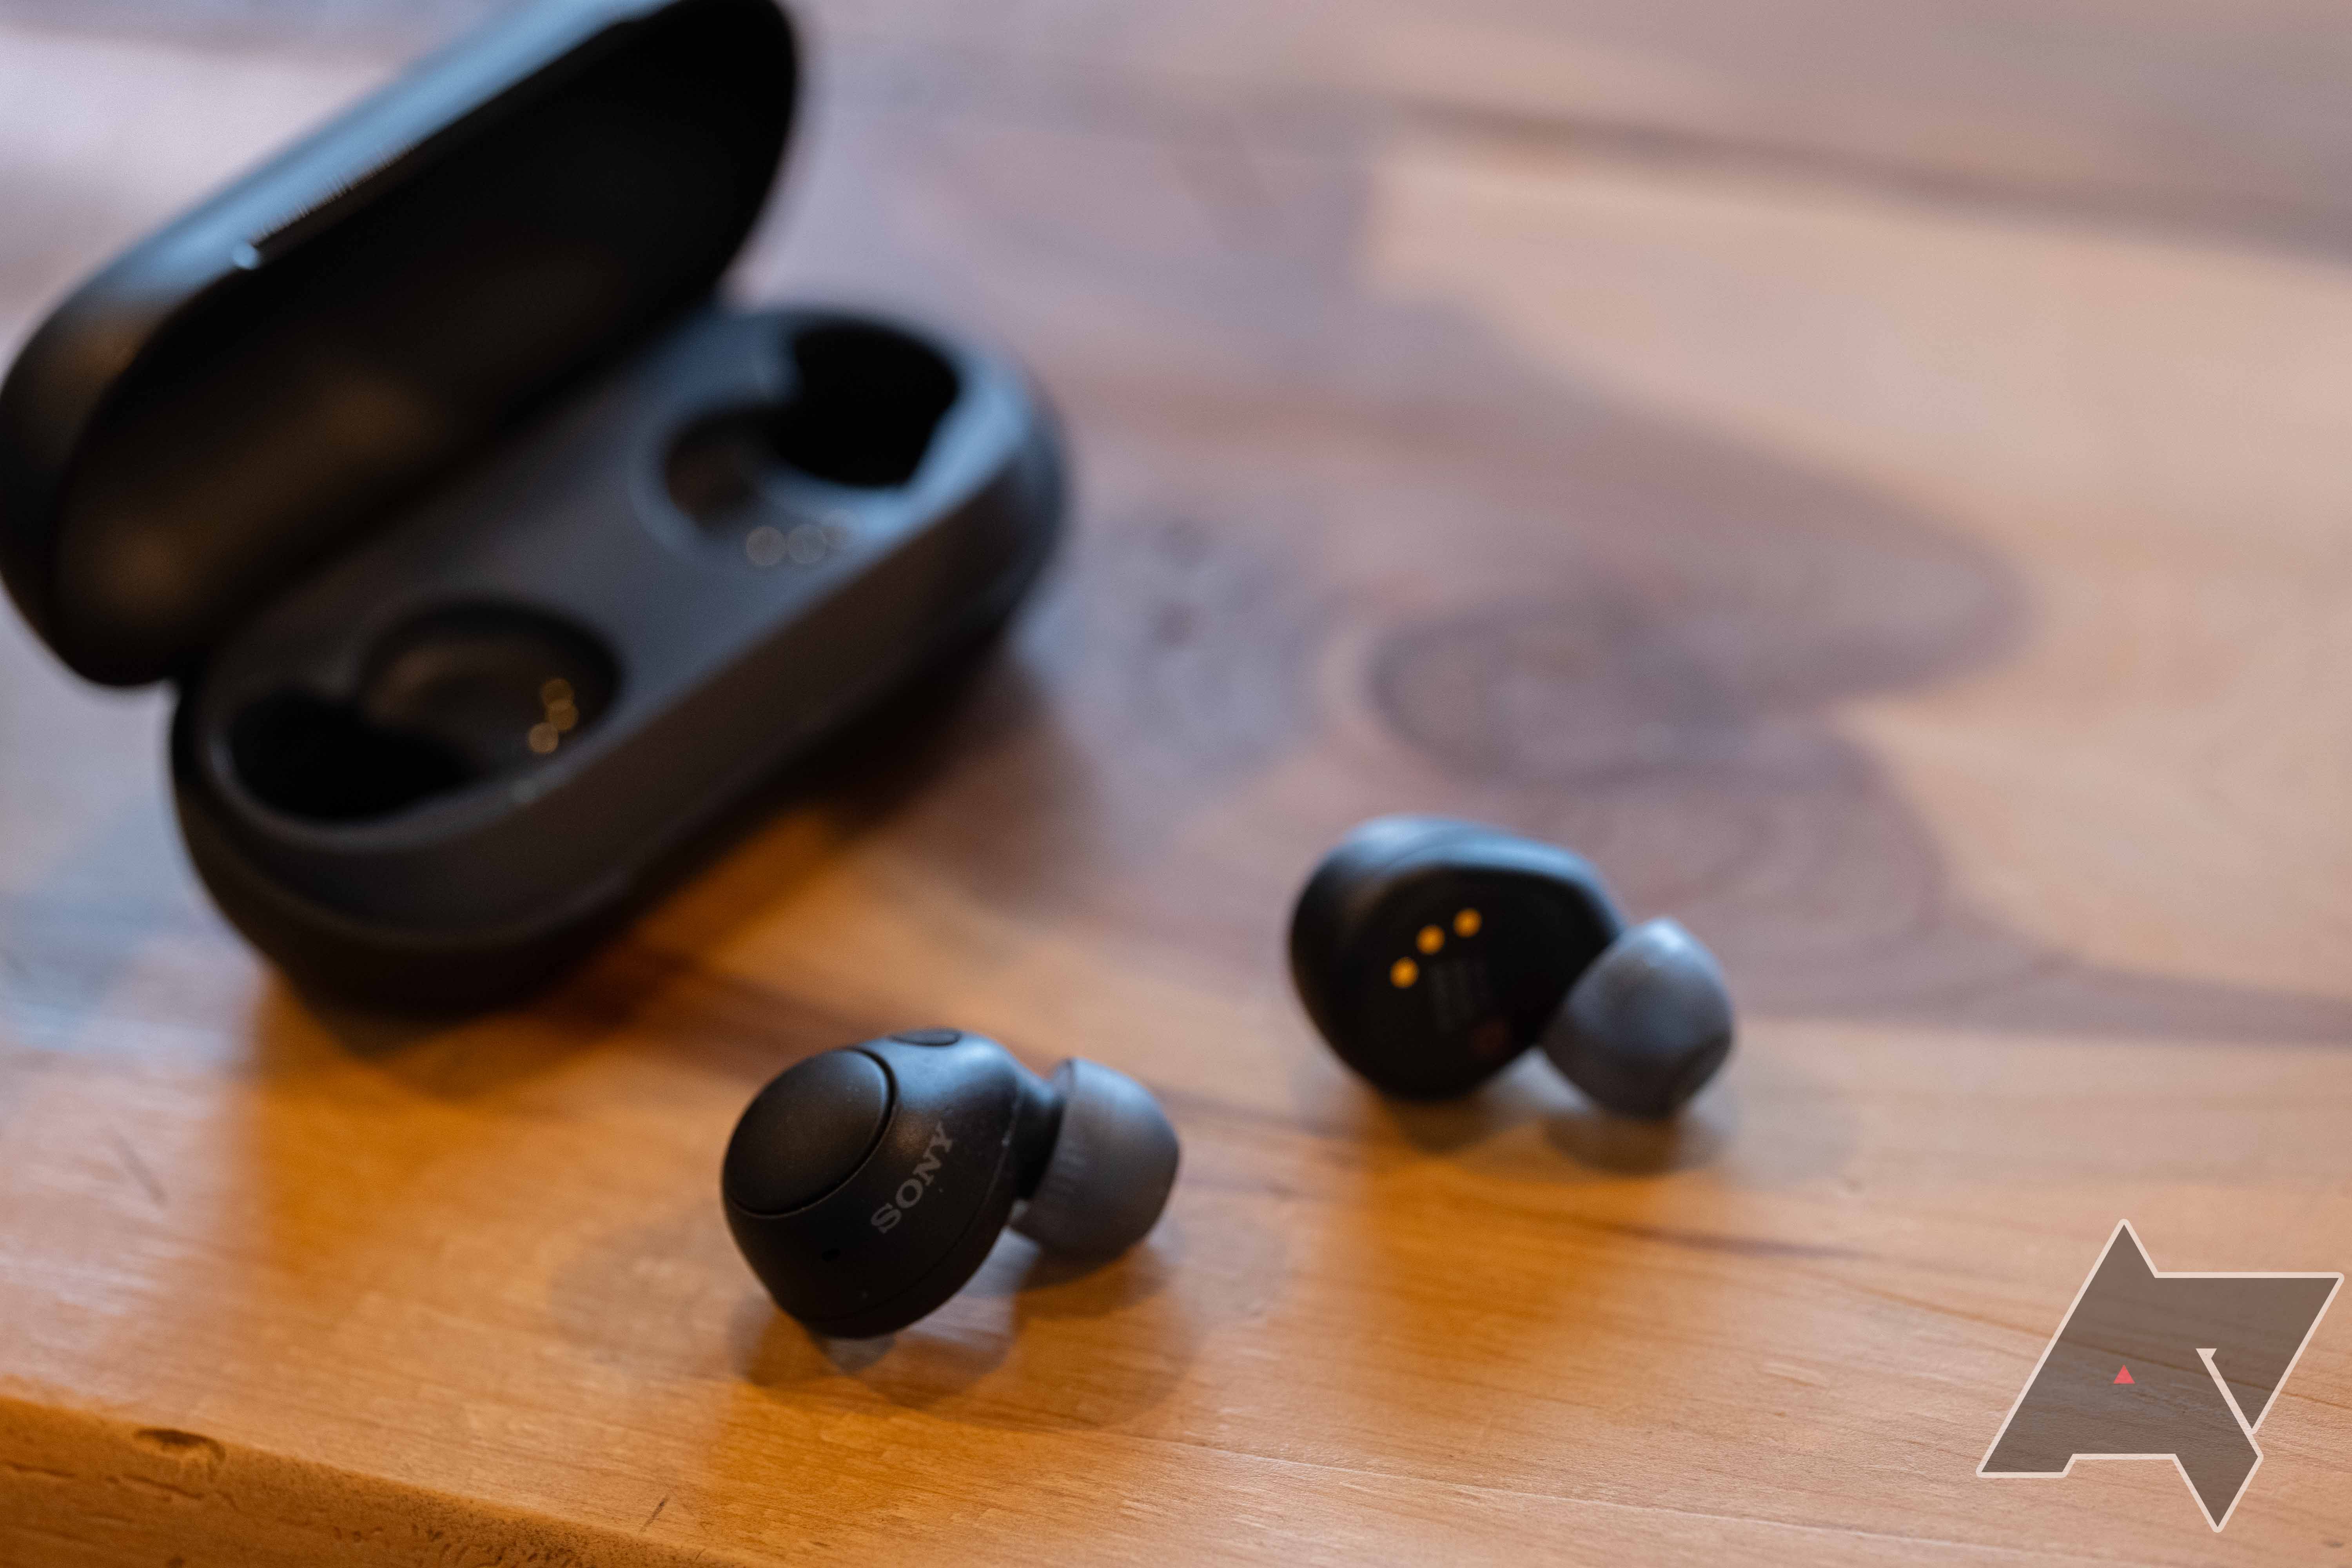 Sony launches WF-C700N truly wireless noise cancelling earbuds – IER Daily